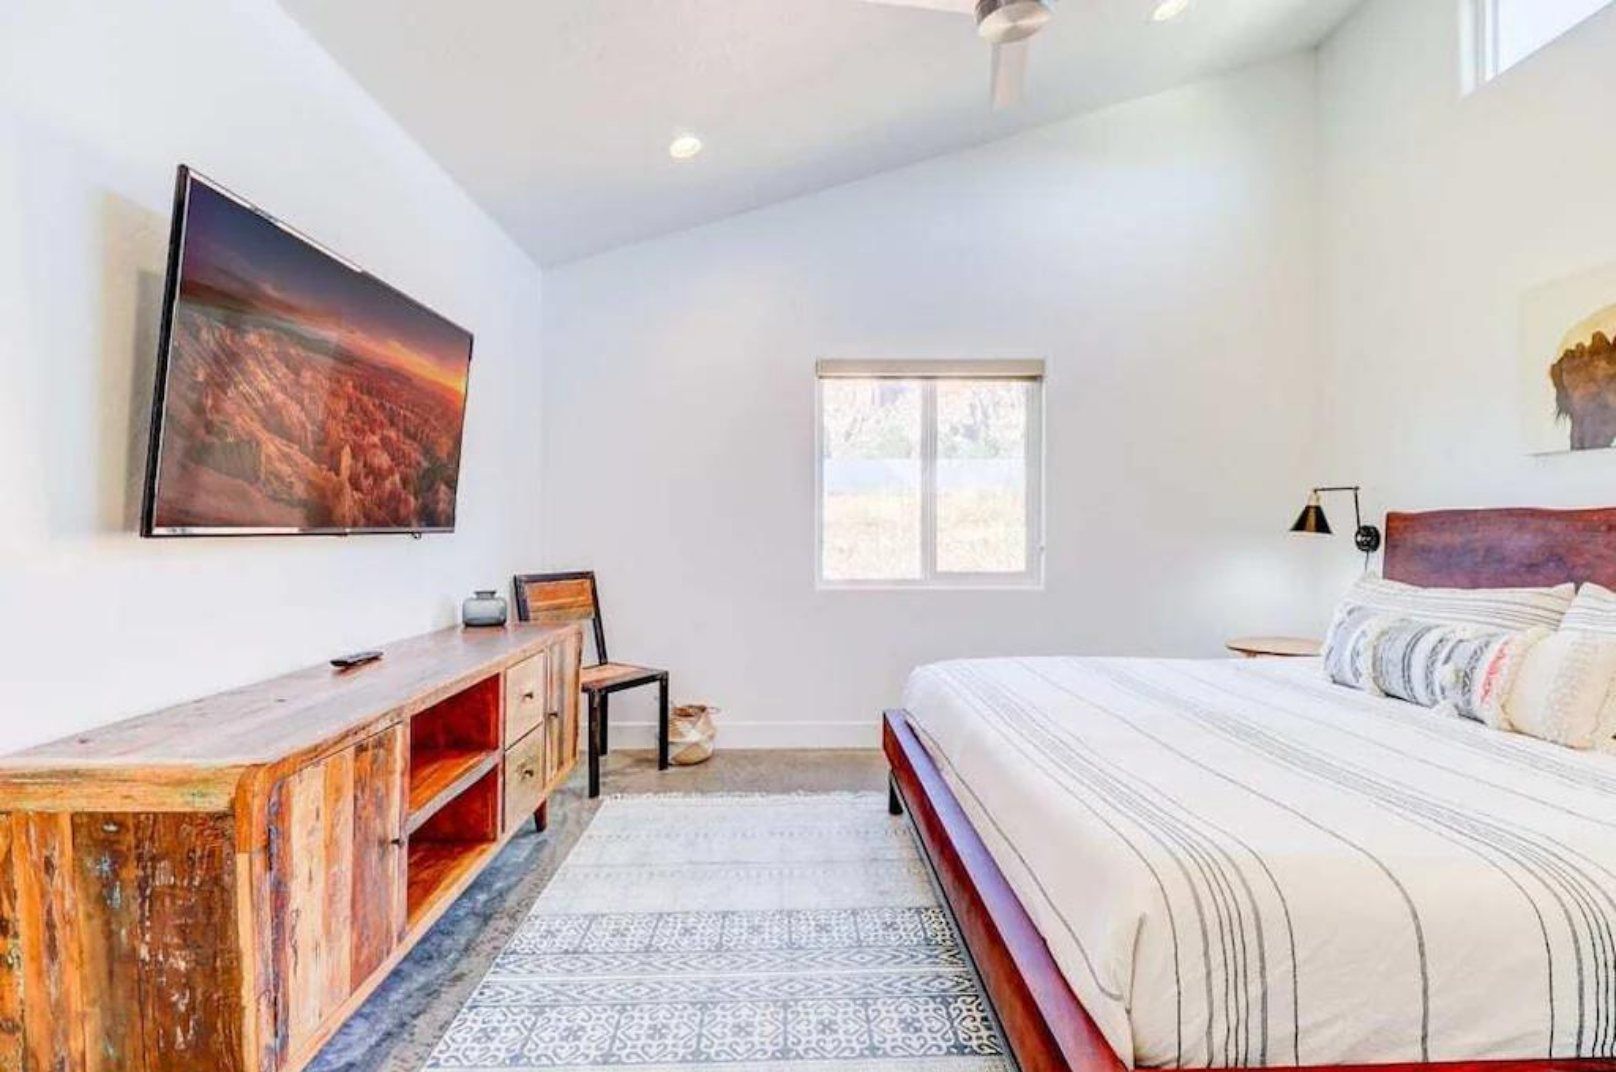 Airbnbs near Zion National Park